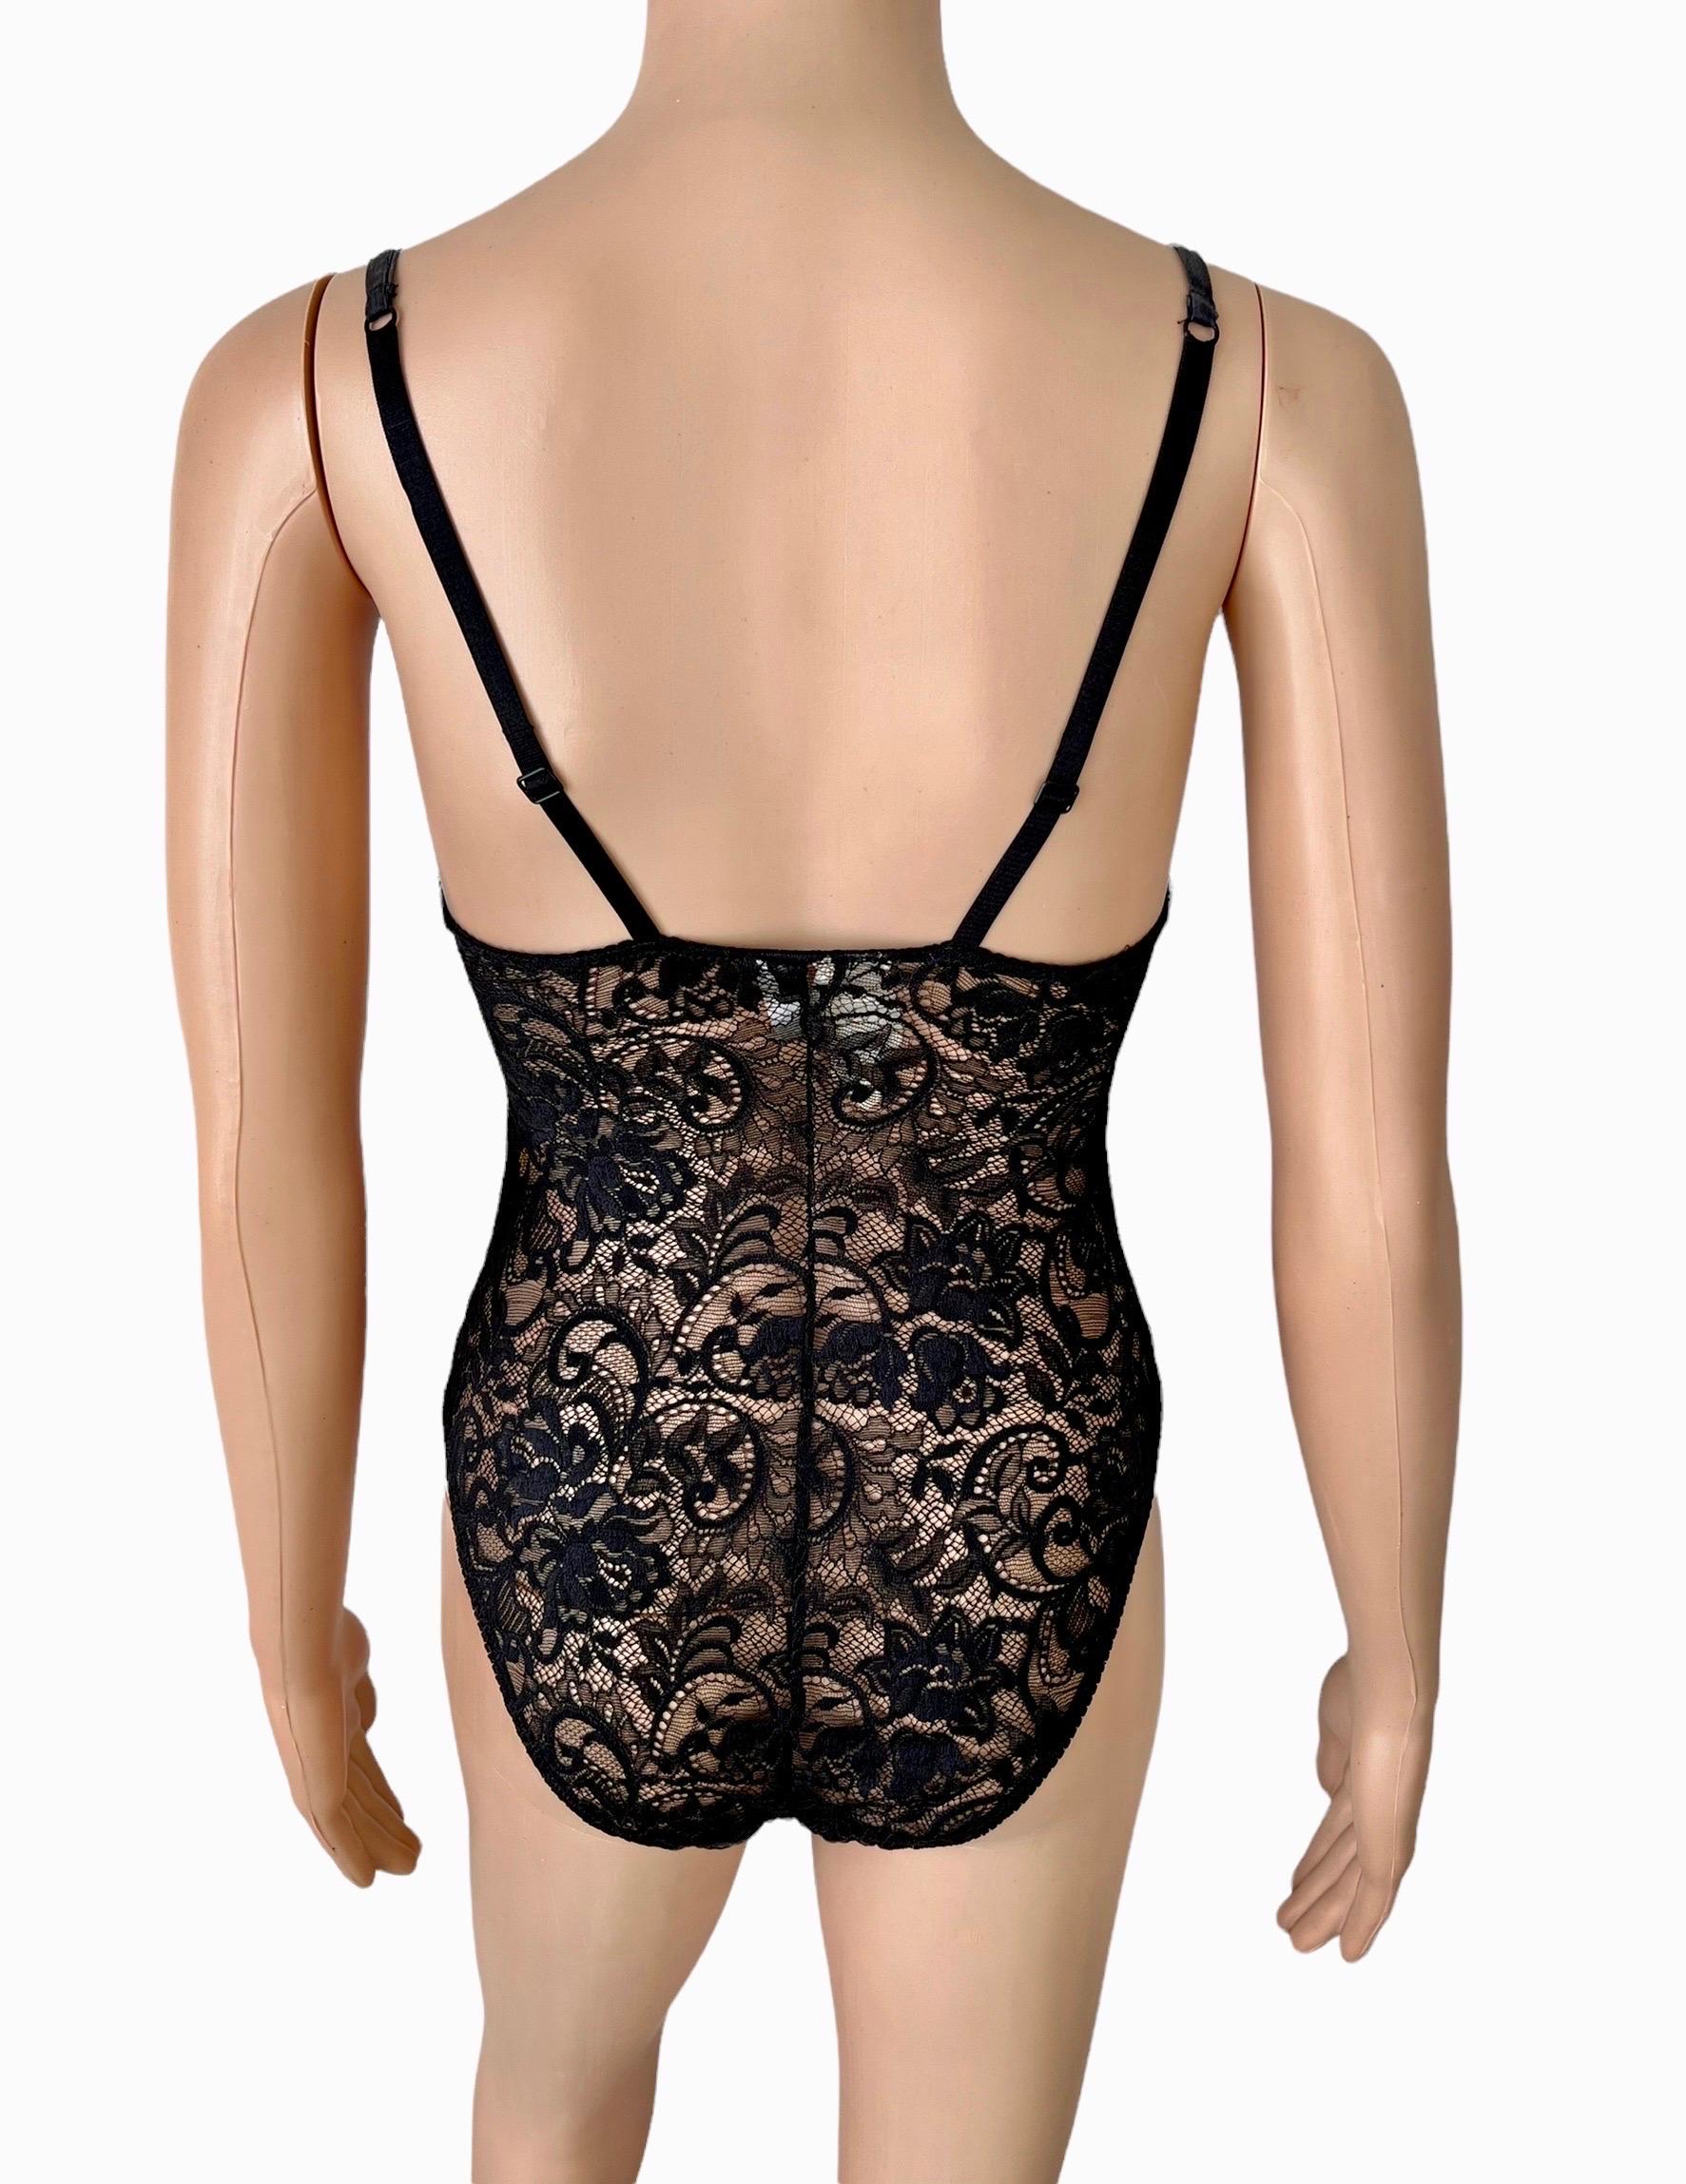 Gianni Versace S/S 1992 Vintage Plunging Baroque Print Sheer Lace Bodysuit Top  For Sale 4